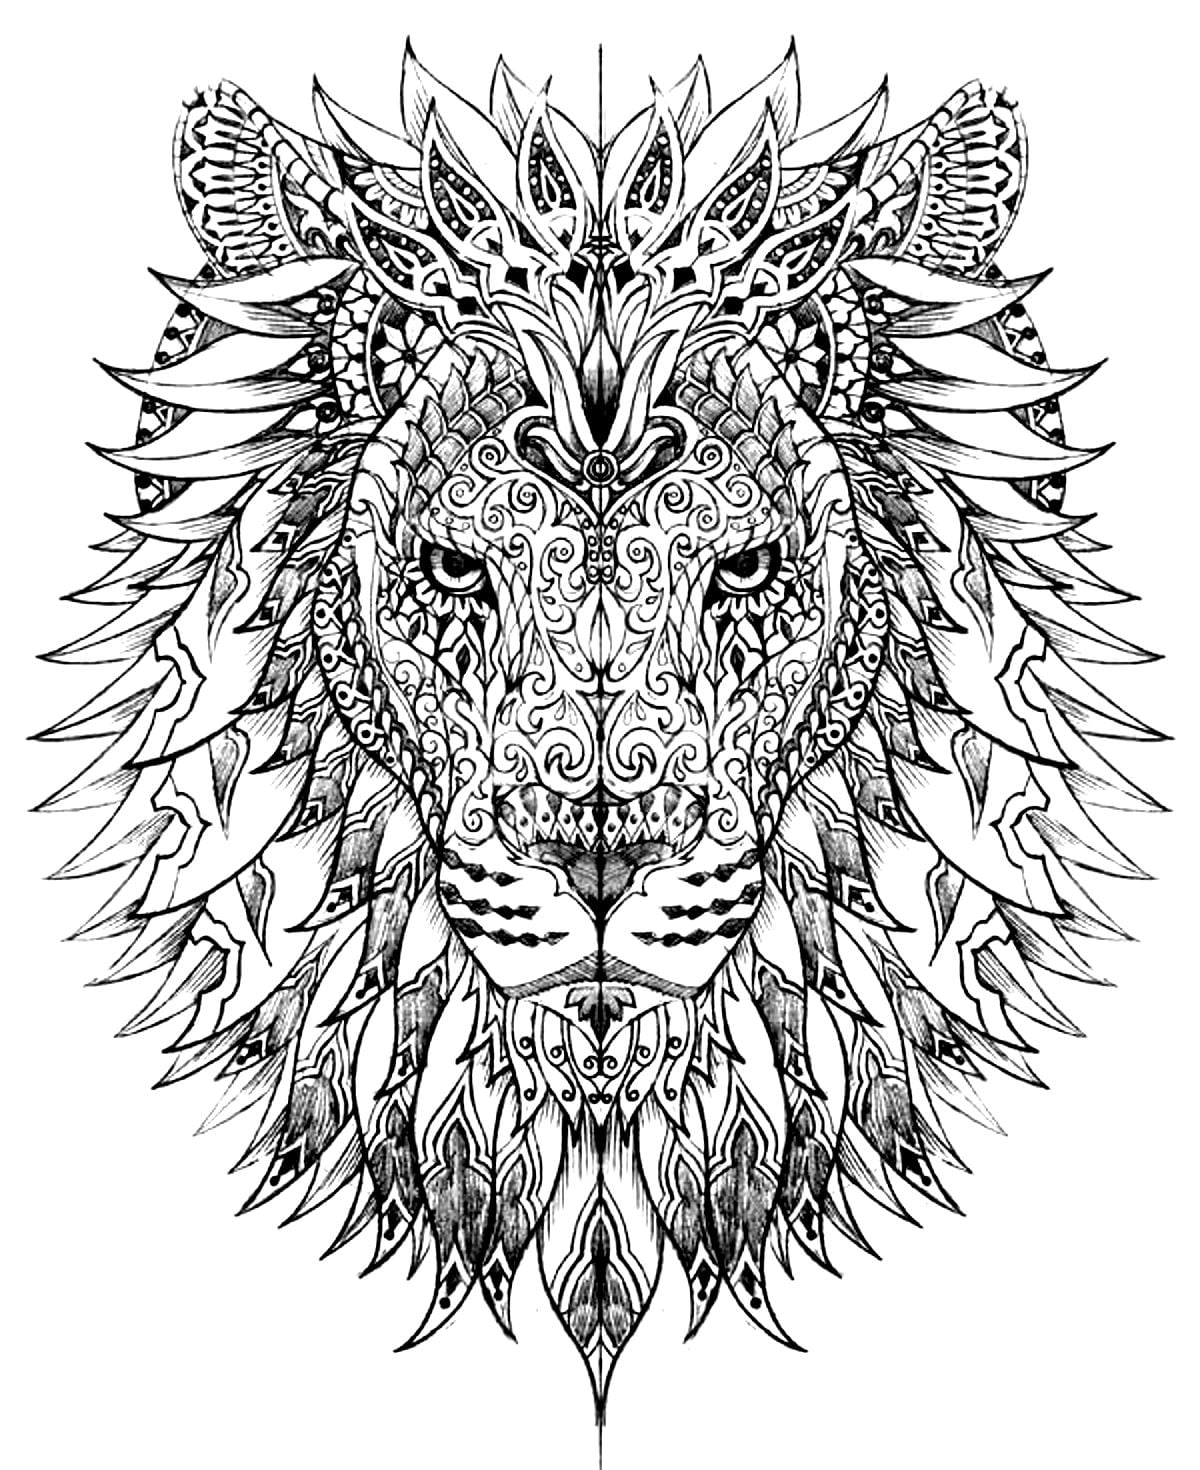 couple coloring pages